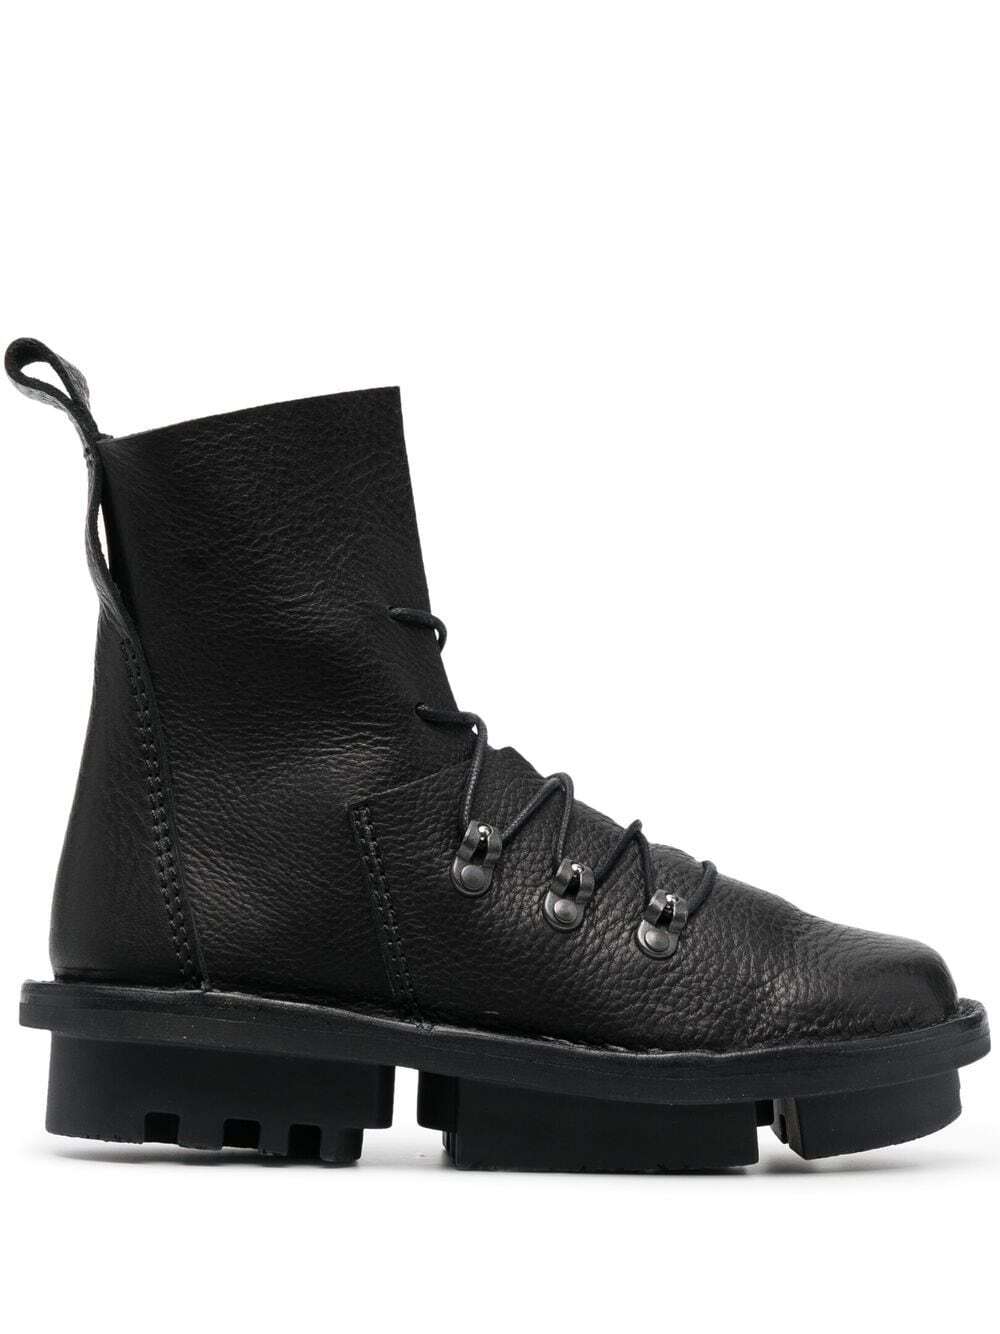 TRIPPEN Stand Still leather ankle boots - Black